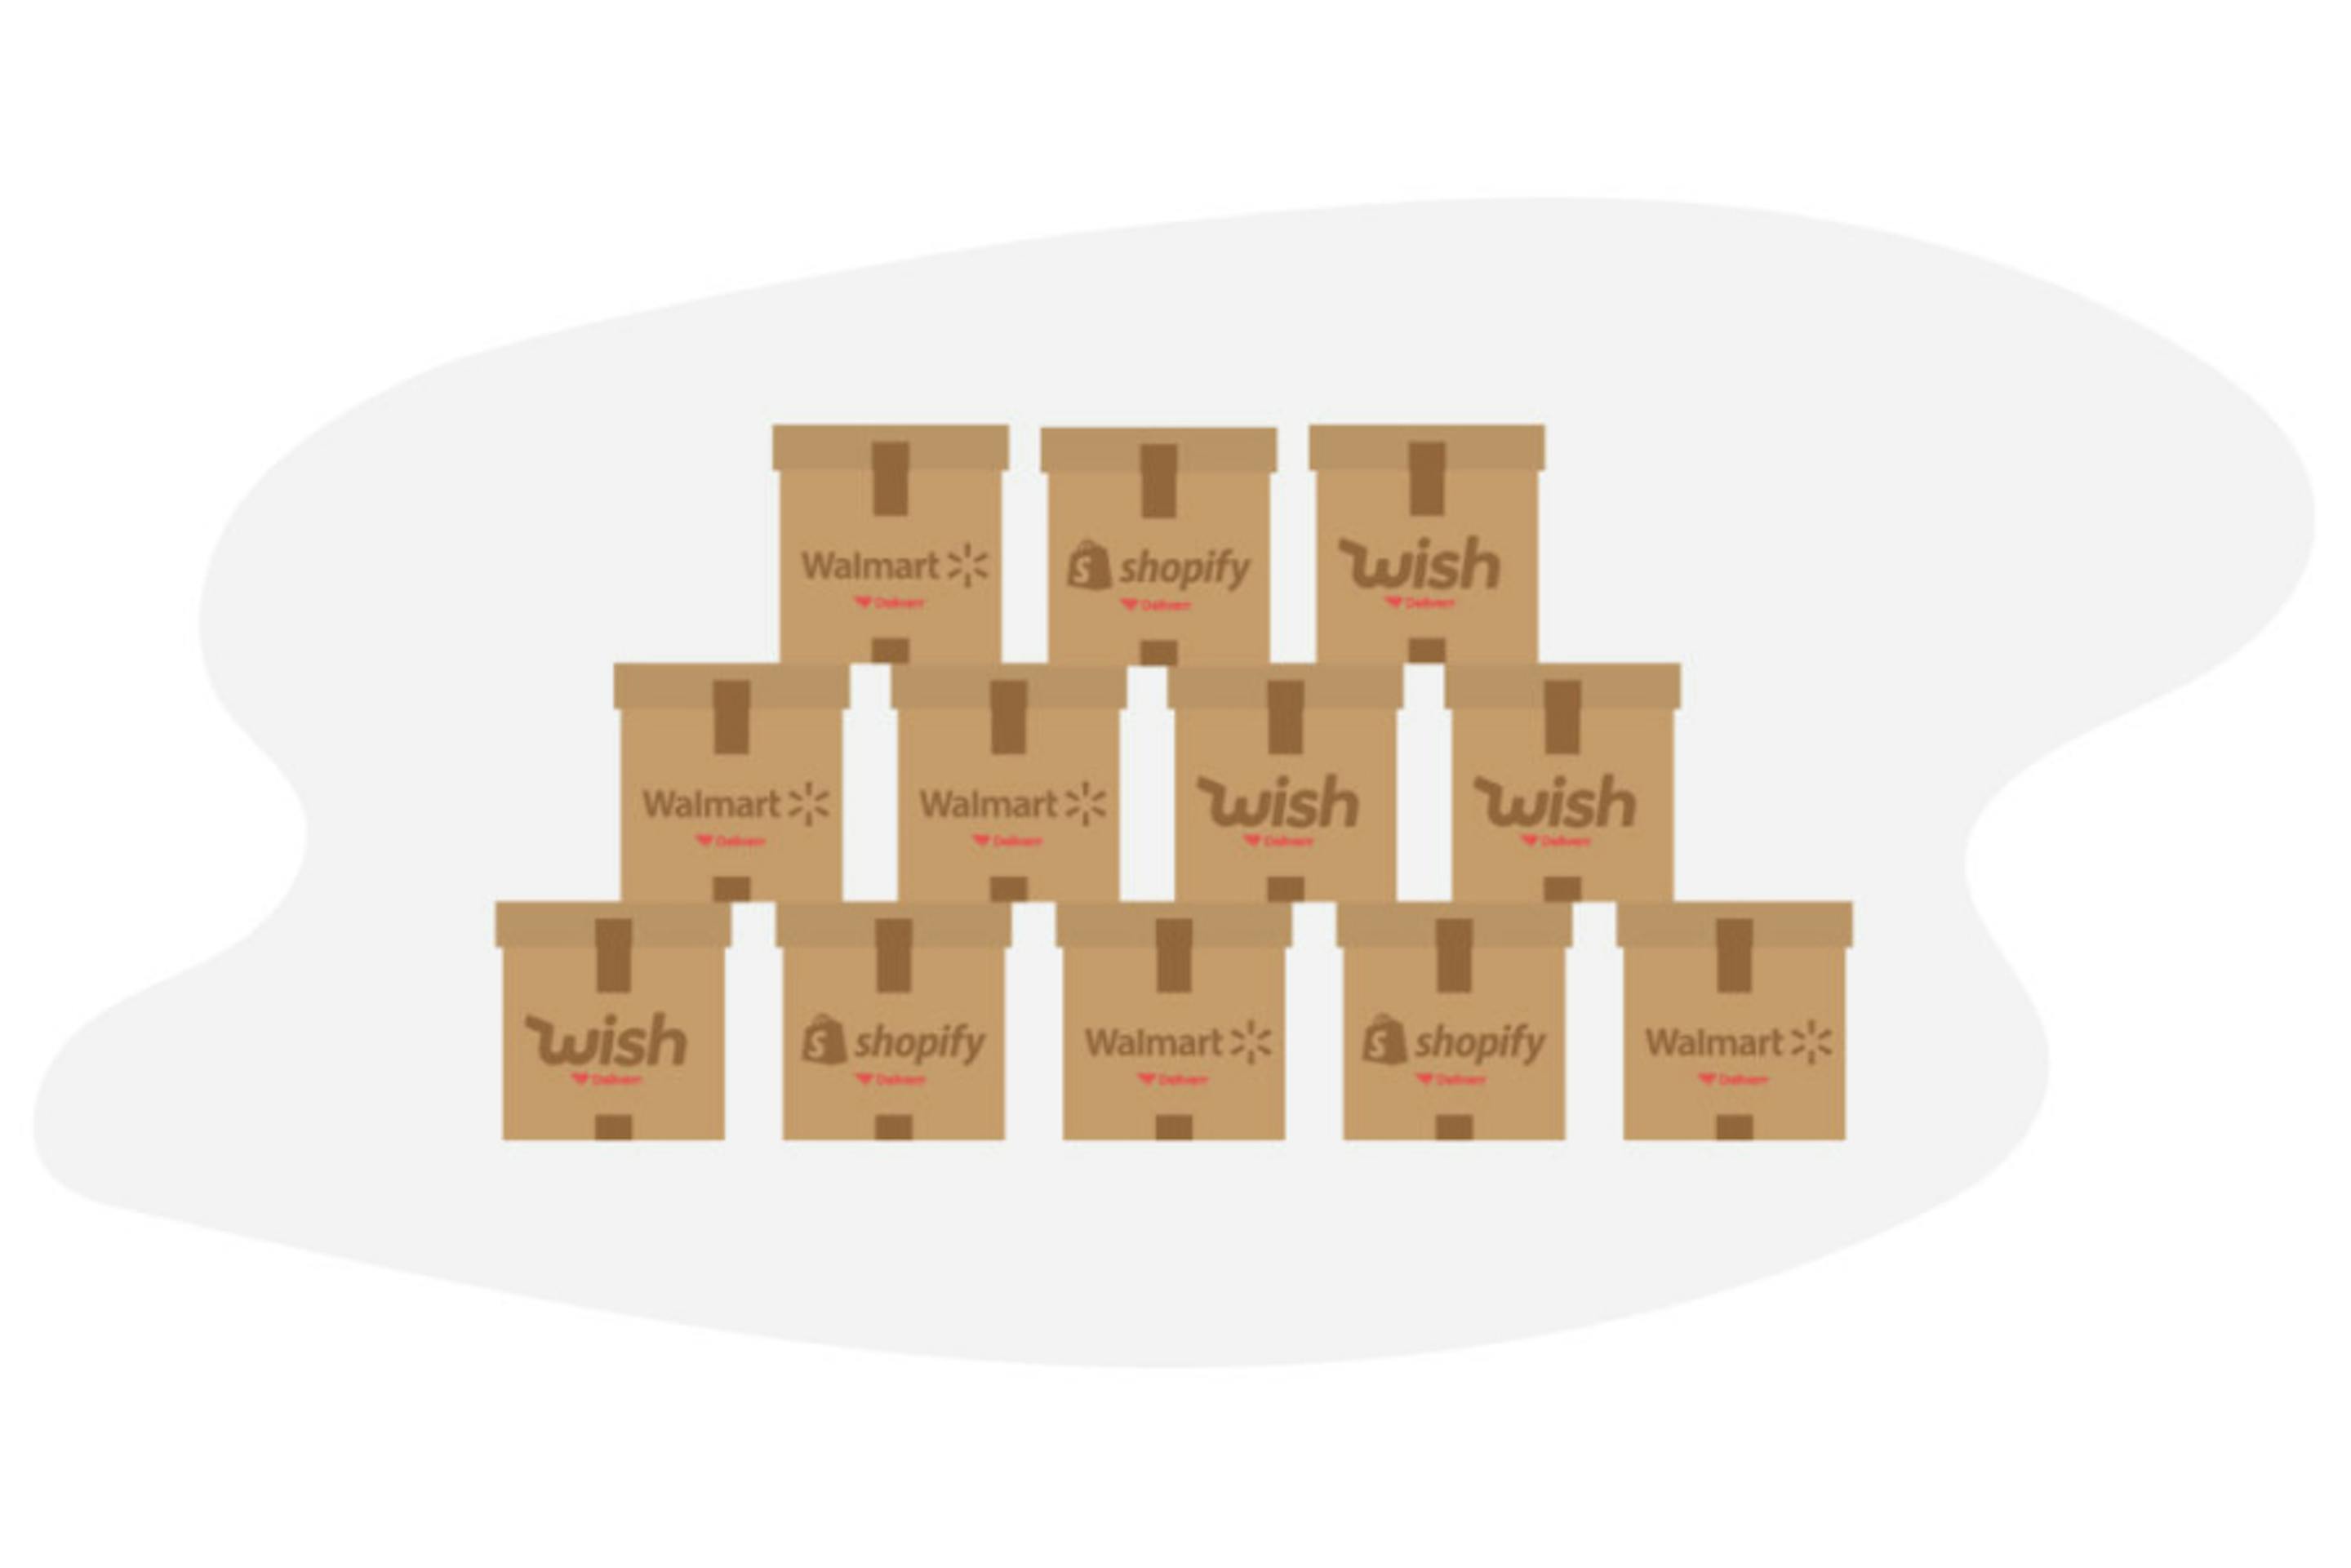 Stacked boxes with e-commerce brand logos